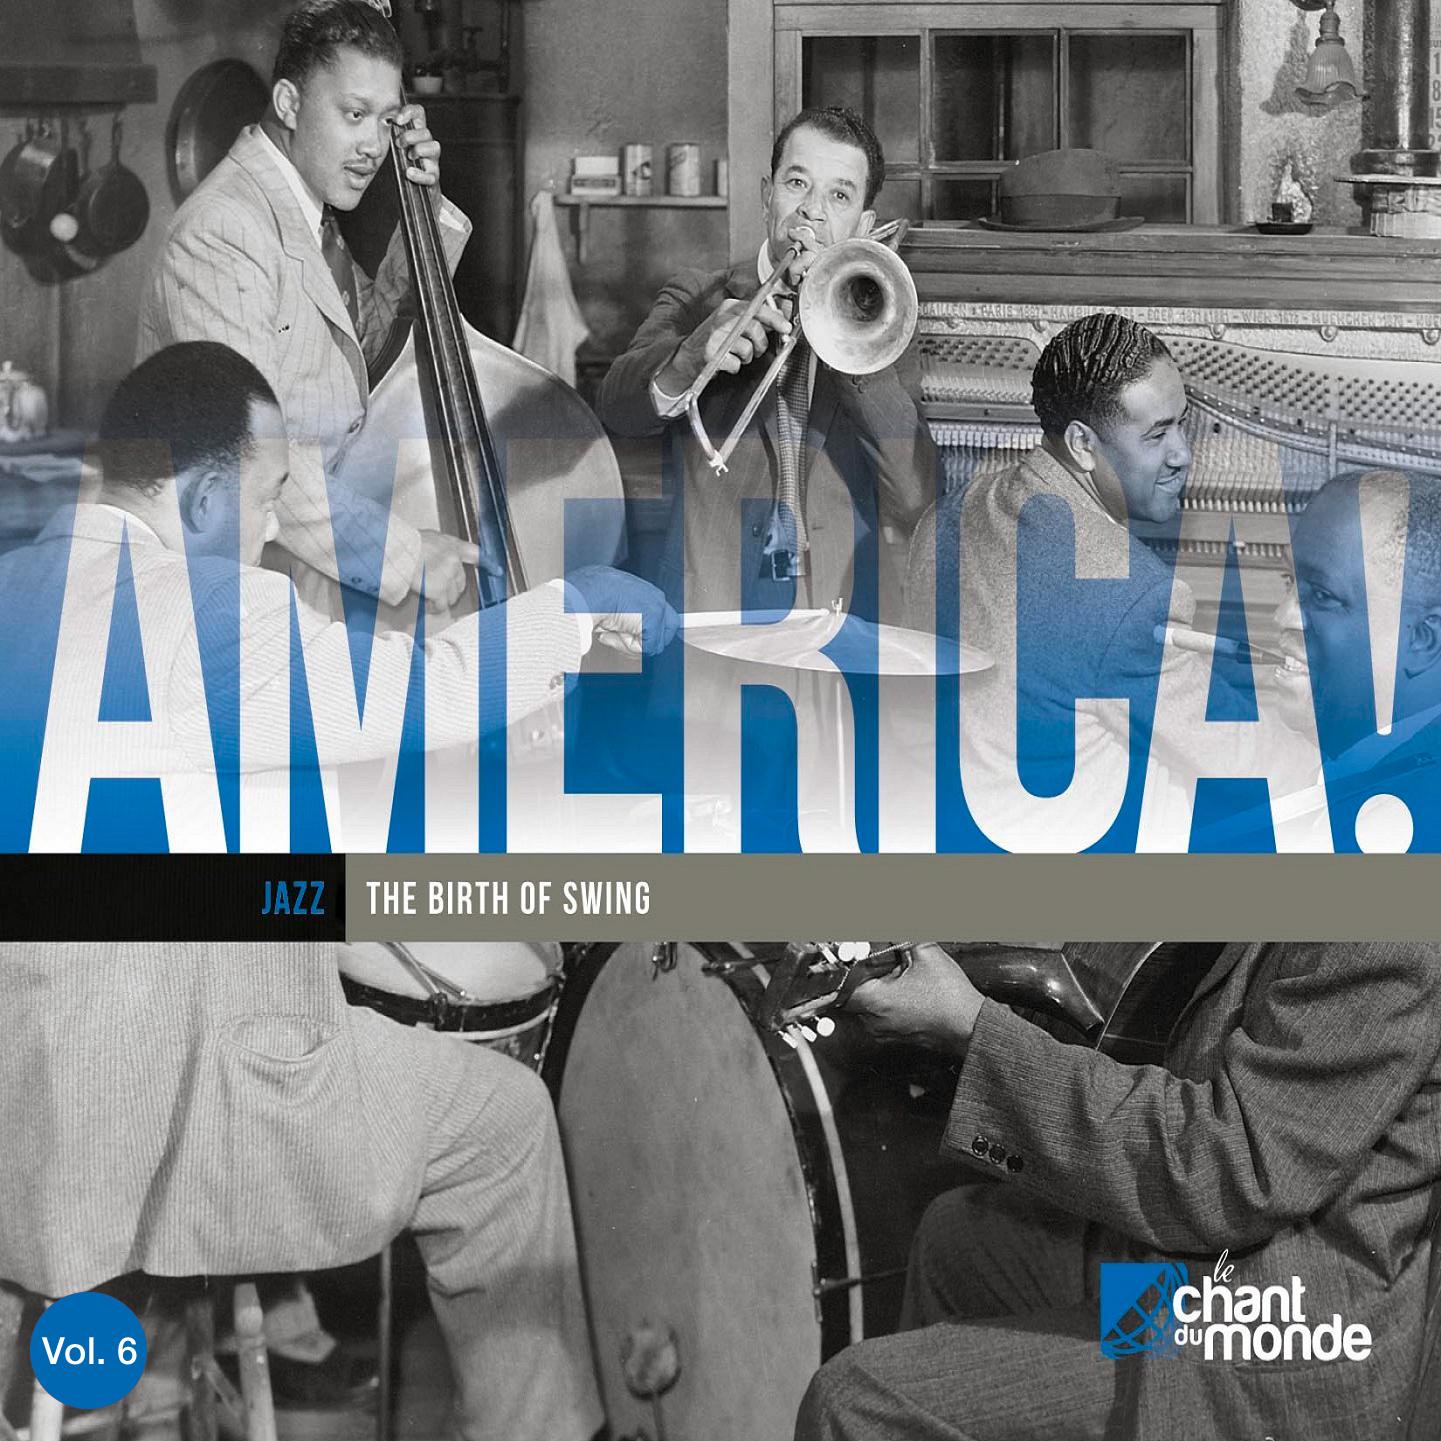 America, Vol. 6: Early Jazz - The Birth of Swing